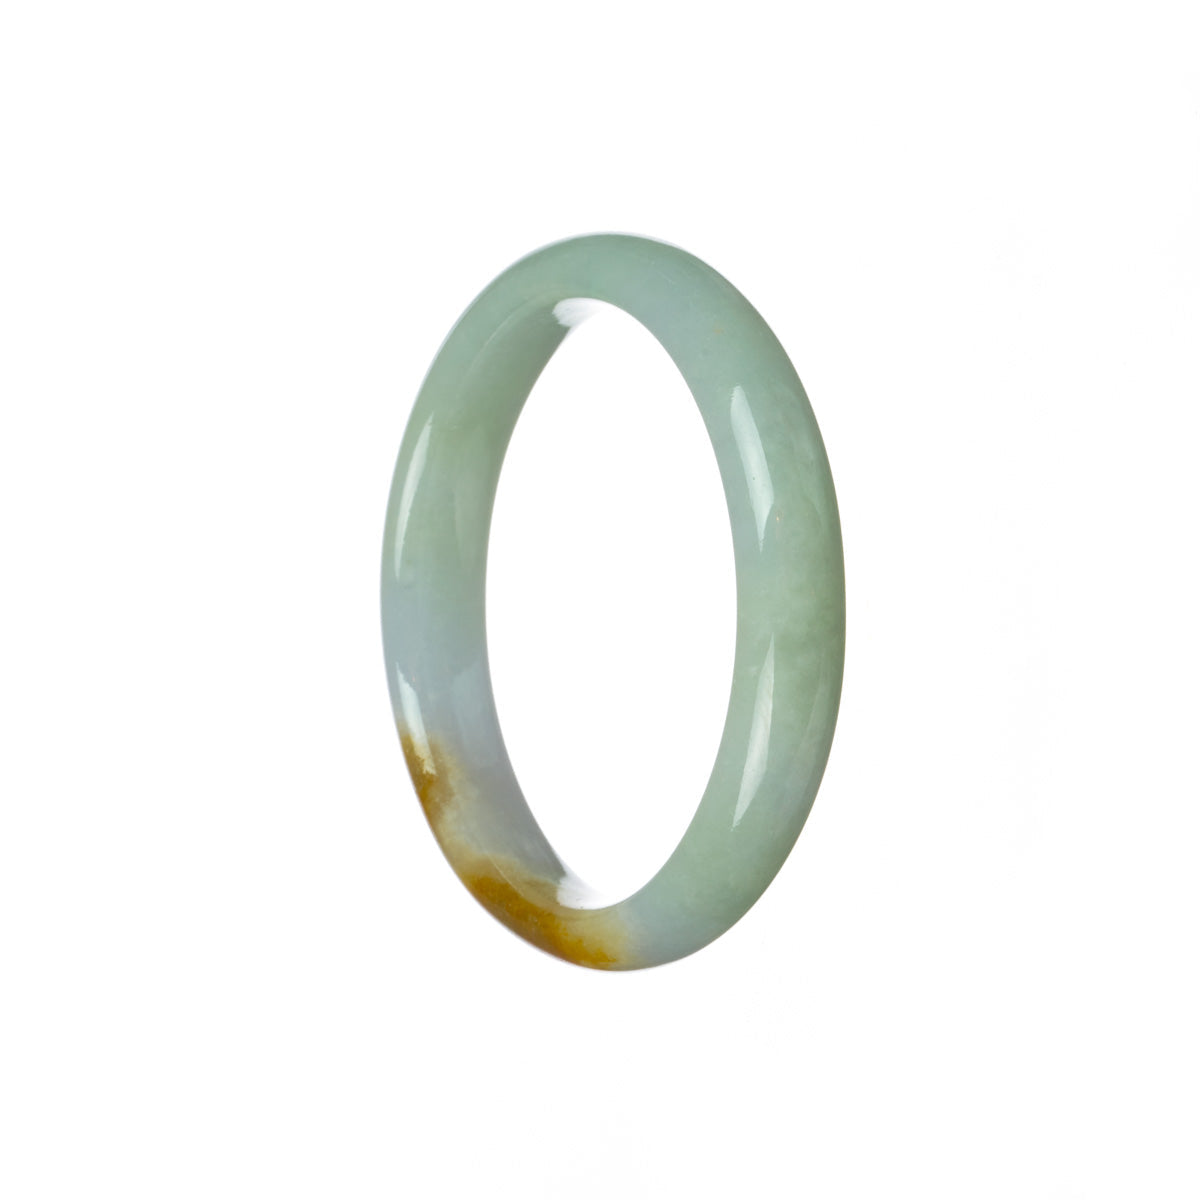 A stunning Burma Jade bracelet in a light apple green shade with hints of yellow and lavender, featuring a 57mm half moon design. Perfect for adding a touch of elegance to any outfit.